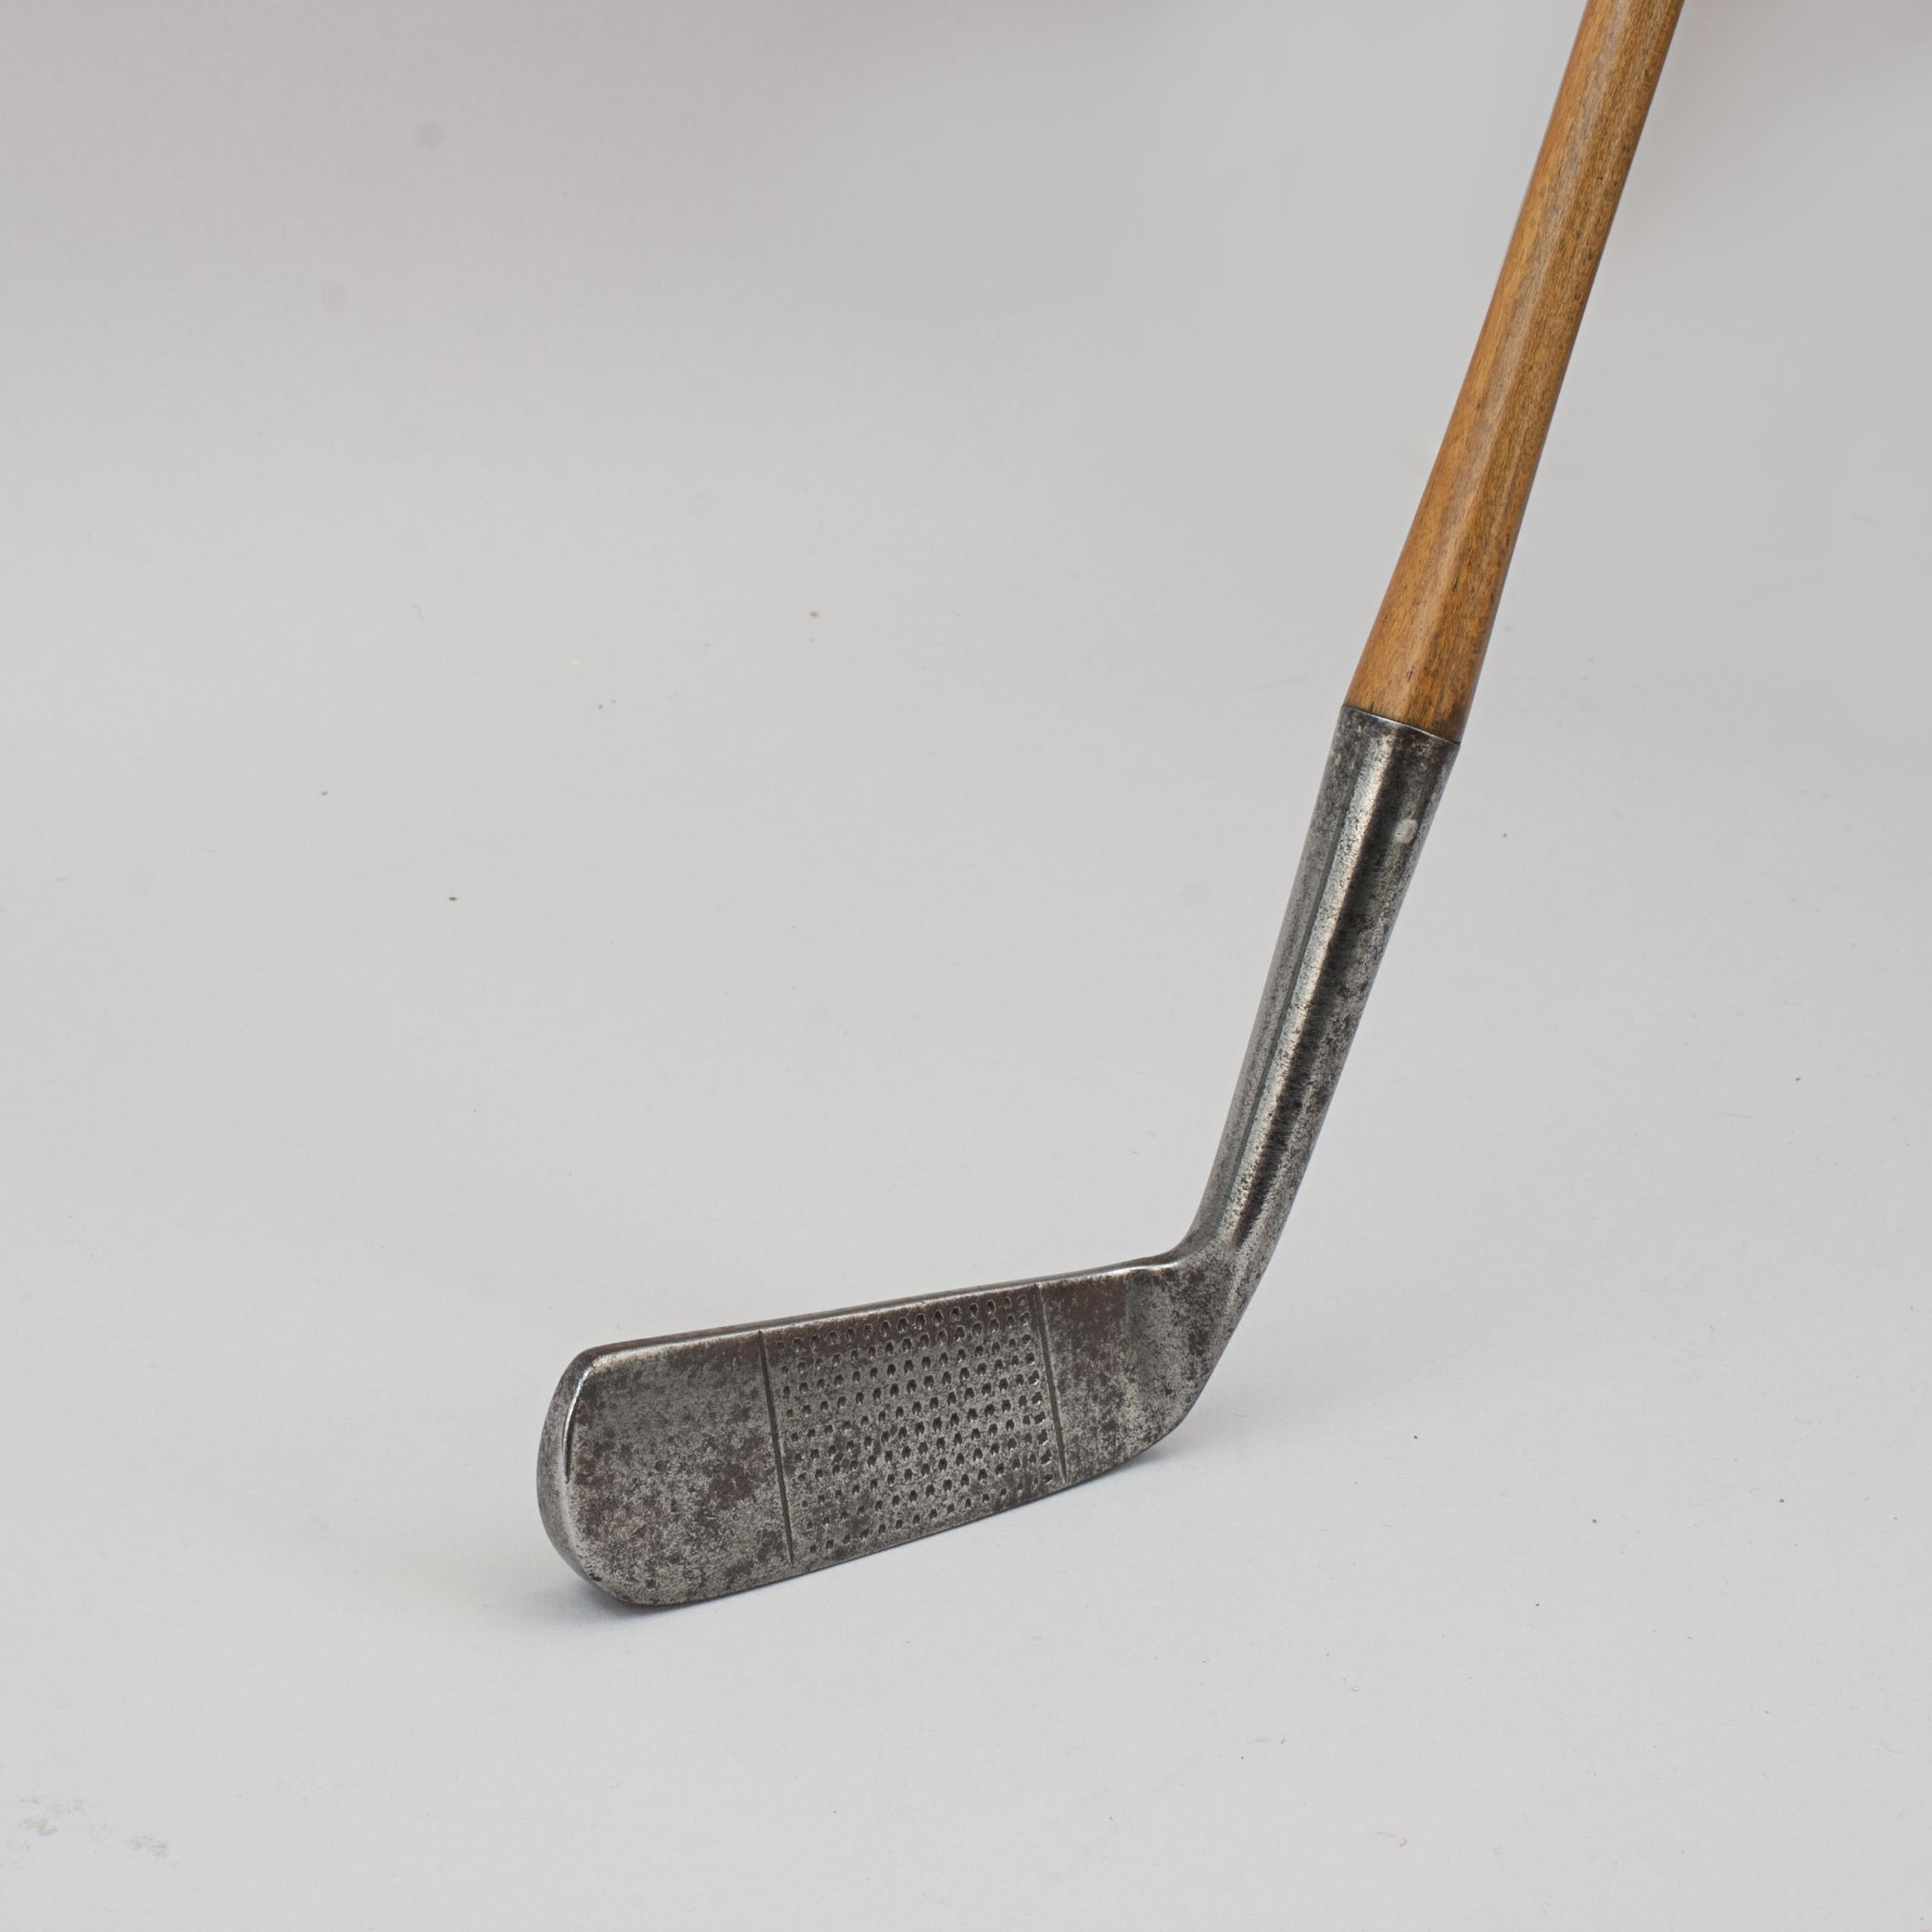 Vintage Bent Neck Putter, Pixie By Haskins Of Hoylake.
A fine and nicely weighted dot punched faced offset putter, wryneck putter by Haskins of Hoylake. The hickory shaft with polished leather grip, the rear of the club head marked 'PIXIE,